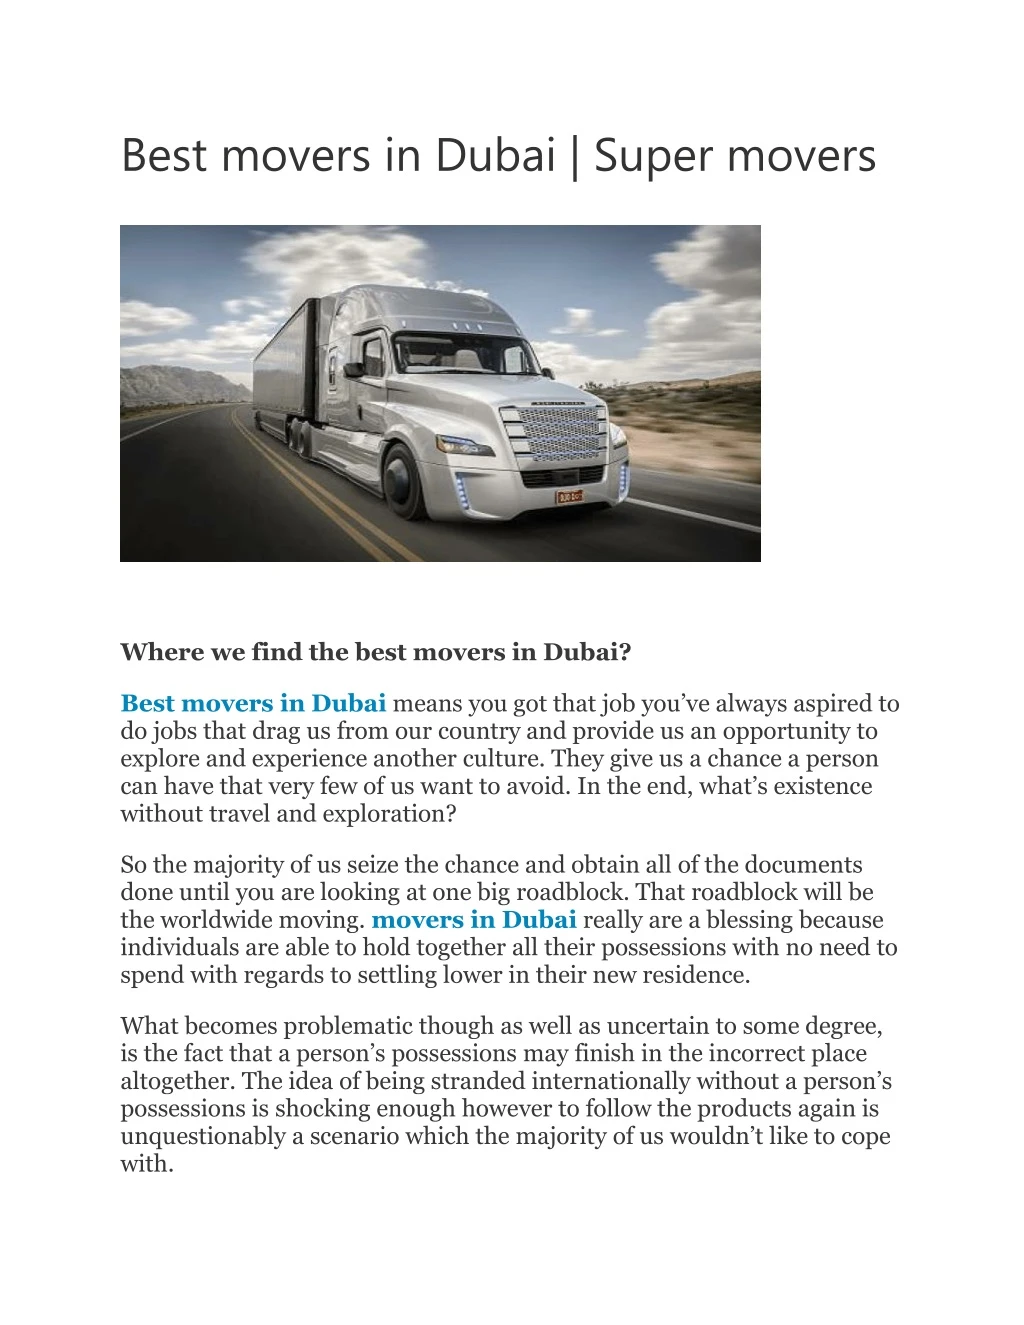 best movers in dubai super movers